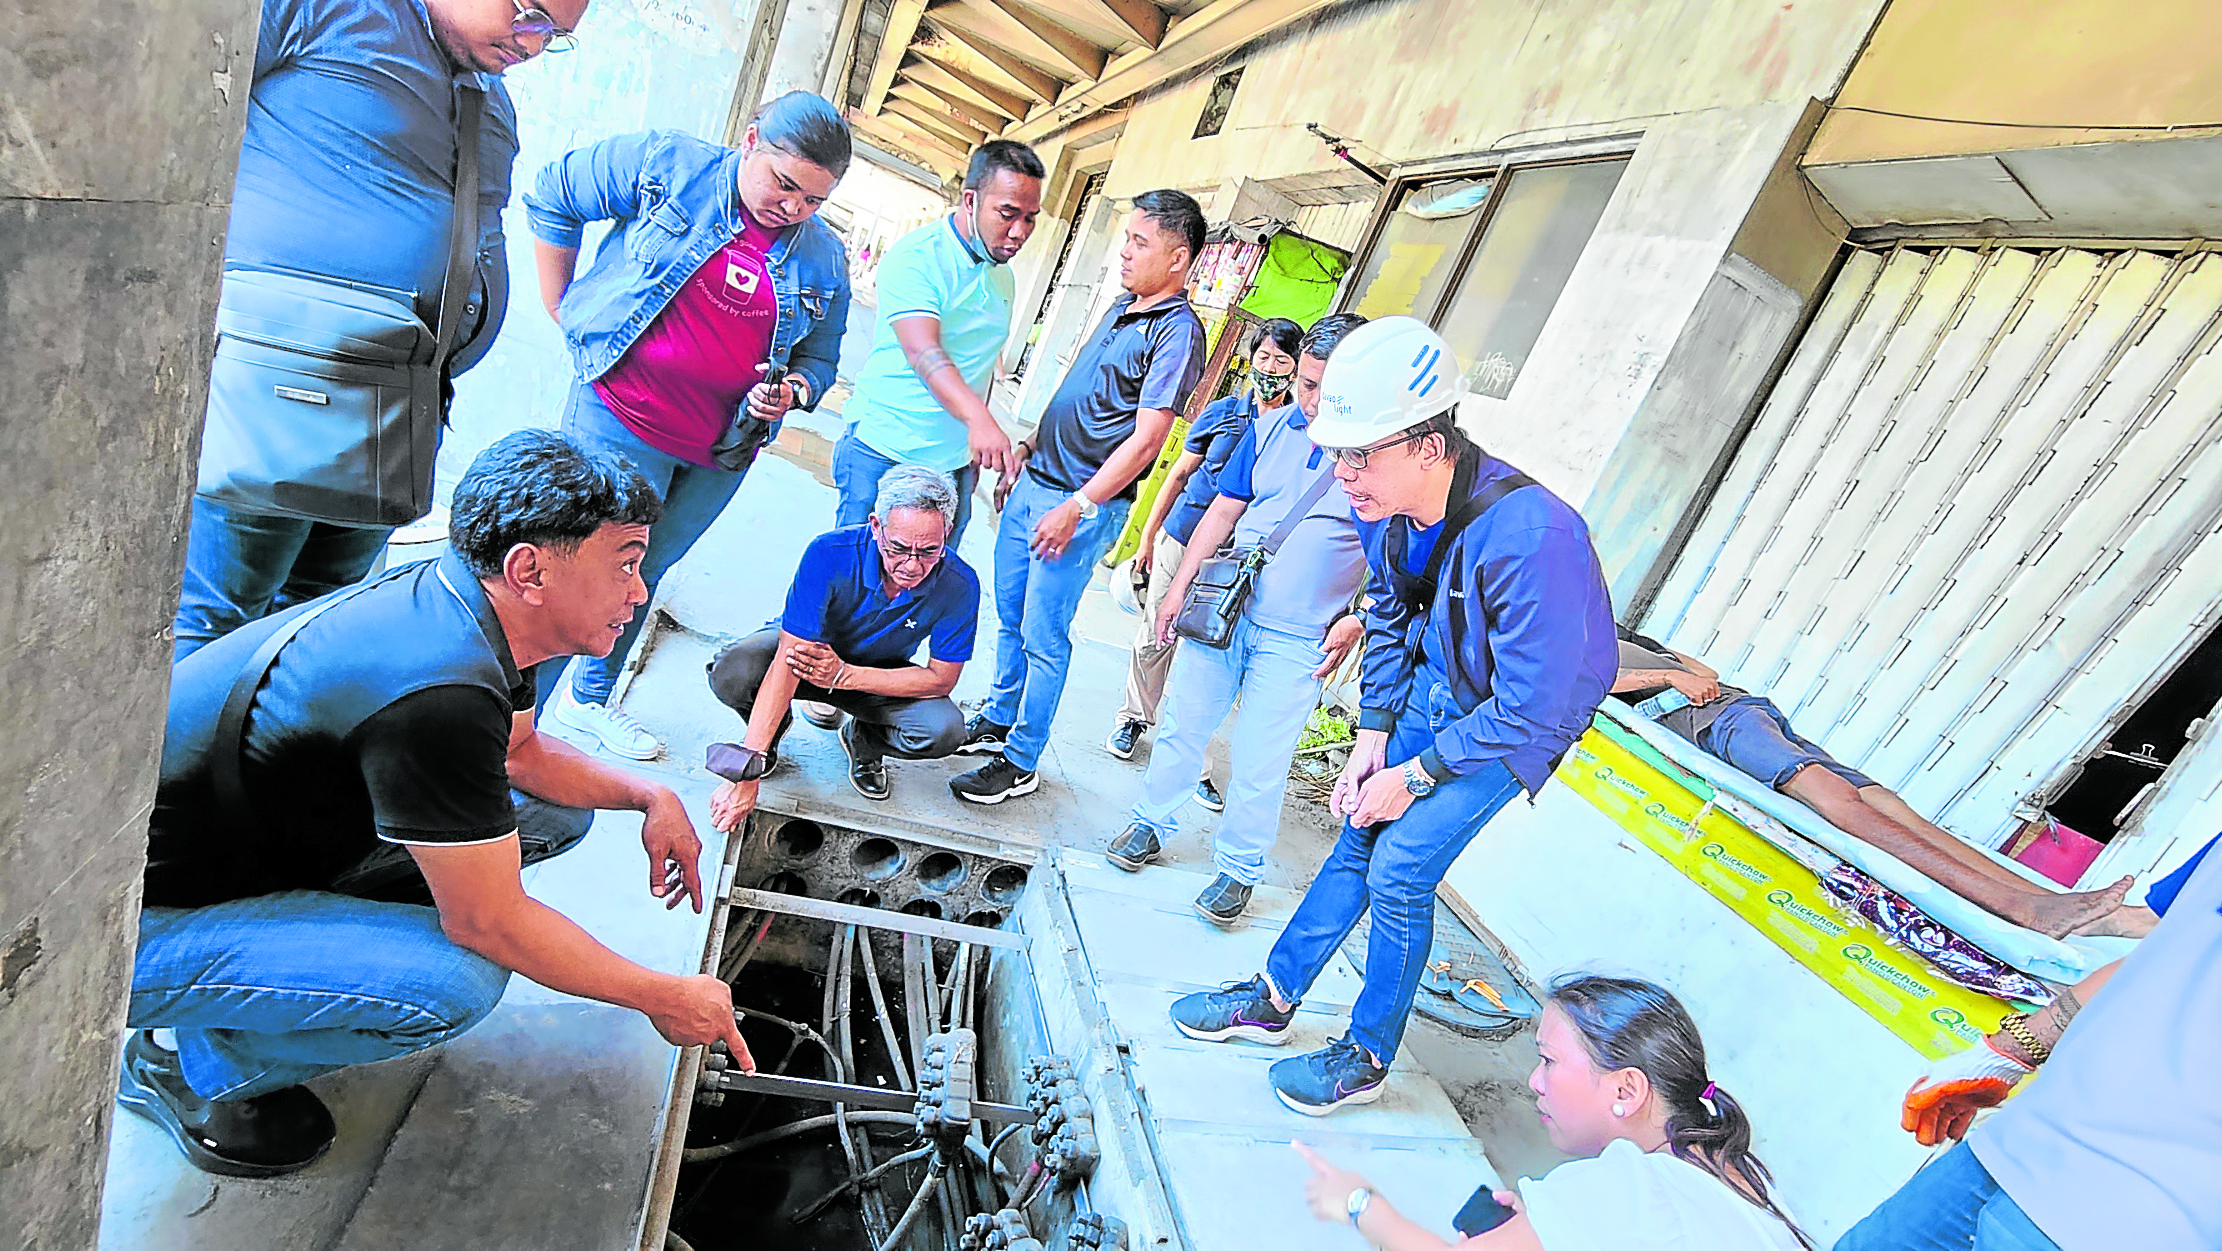 BENCHMARK Officials from Zamboanga Peninsula Polytechnic State University visit Davao City to see the undergroundcabling project. They plan to implement the same project on their university campus. —PHOTO FROM ABOITIZ POWER